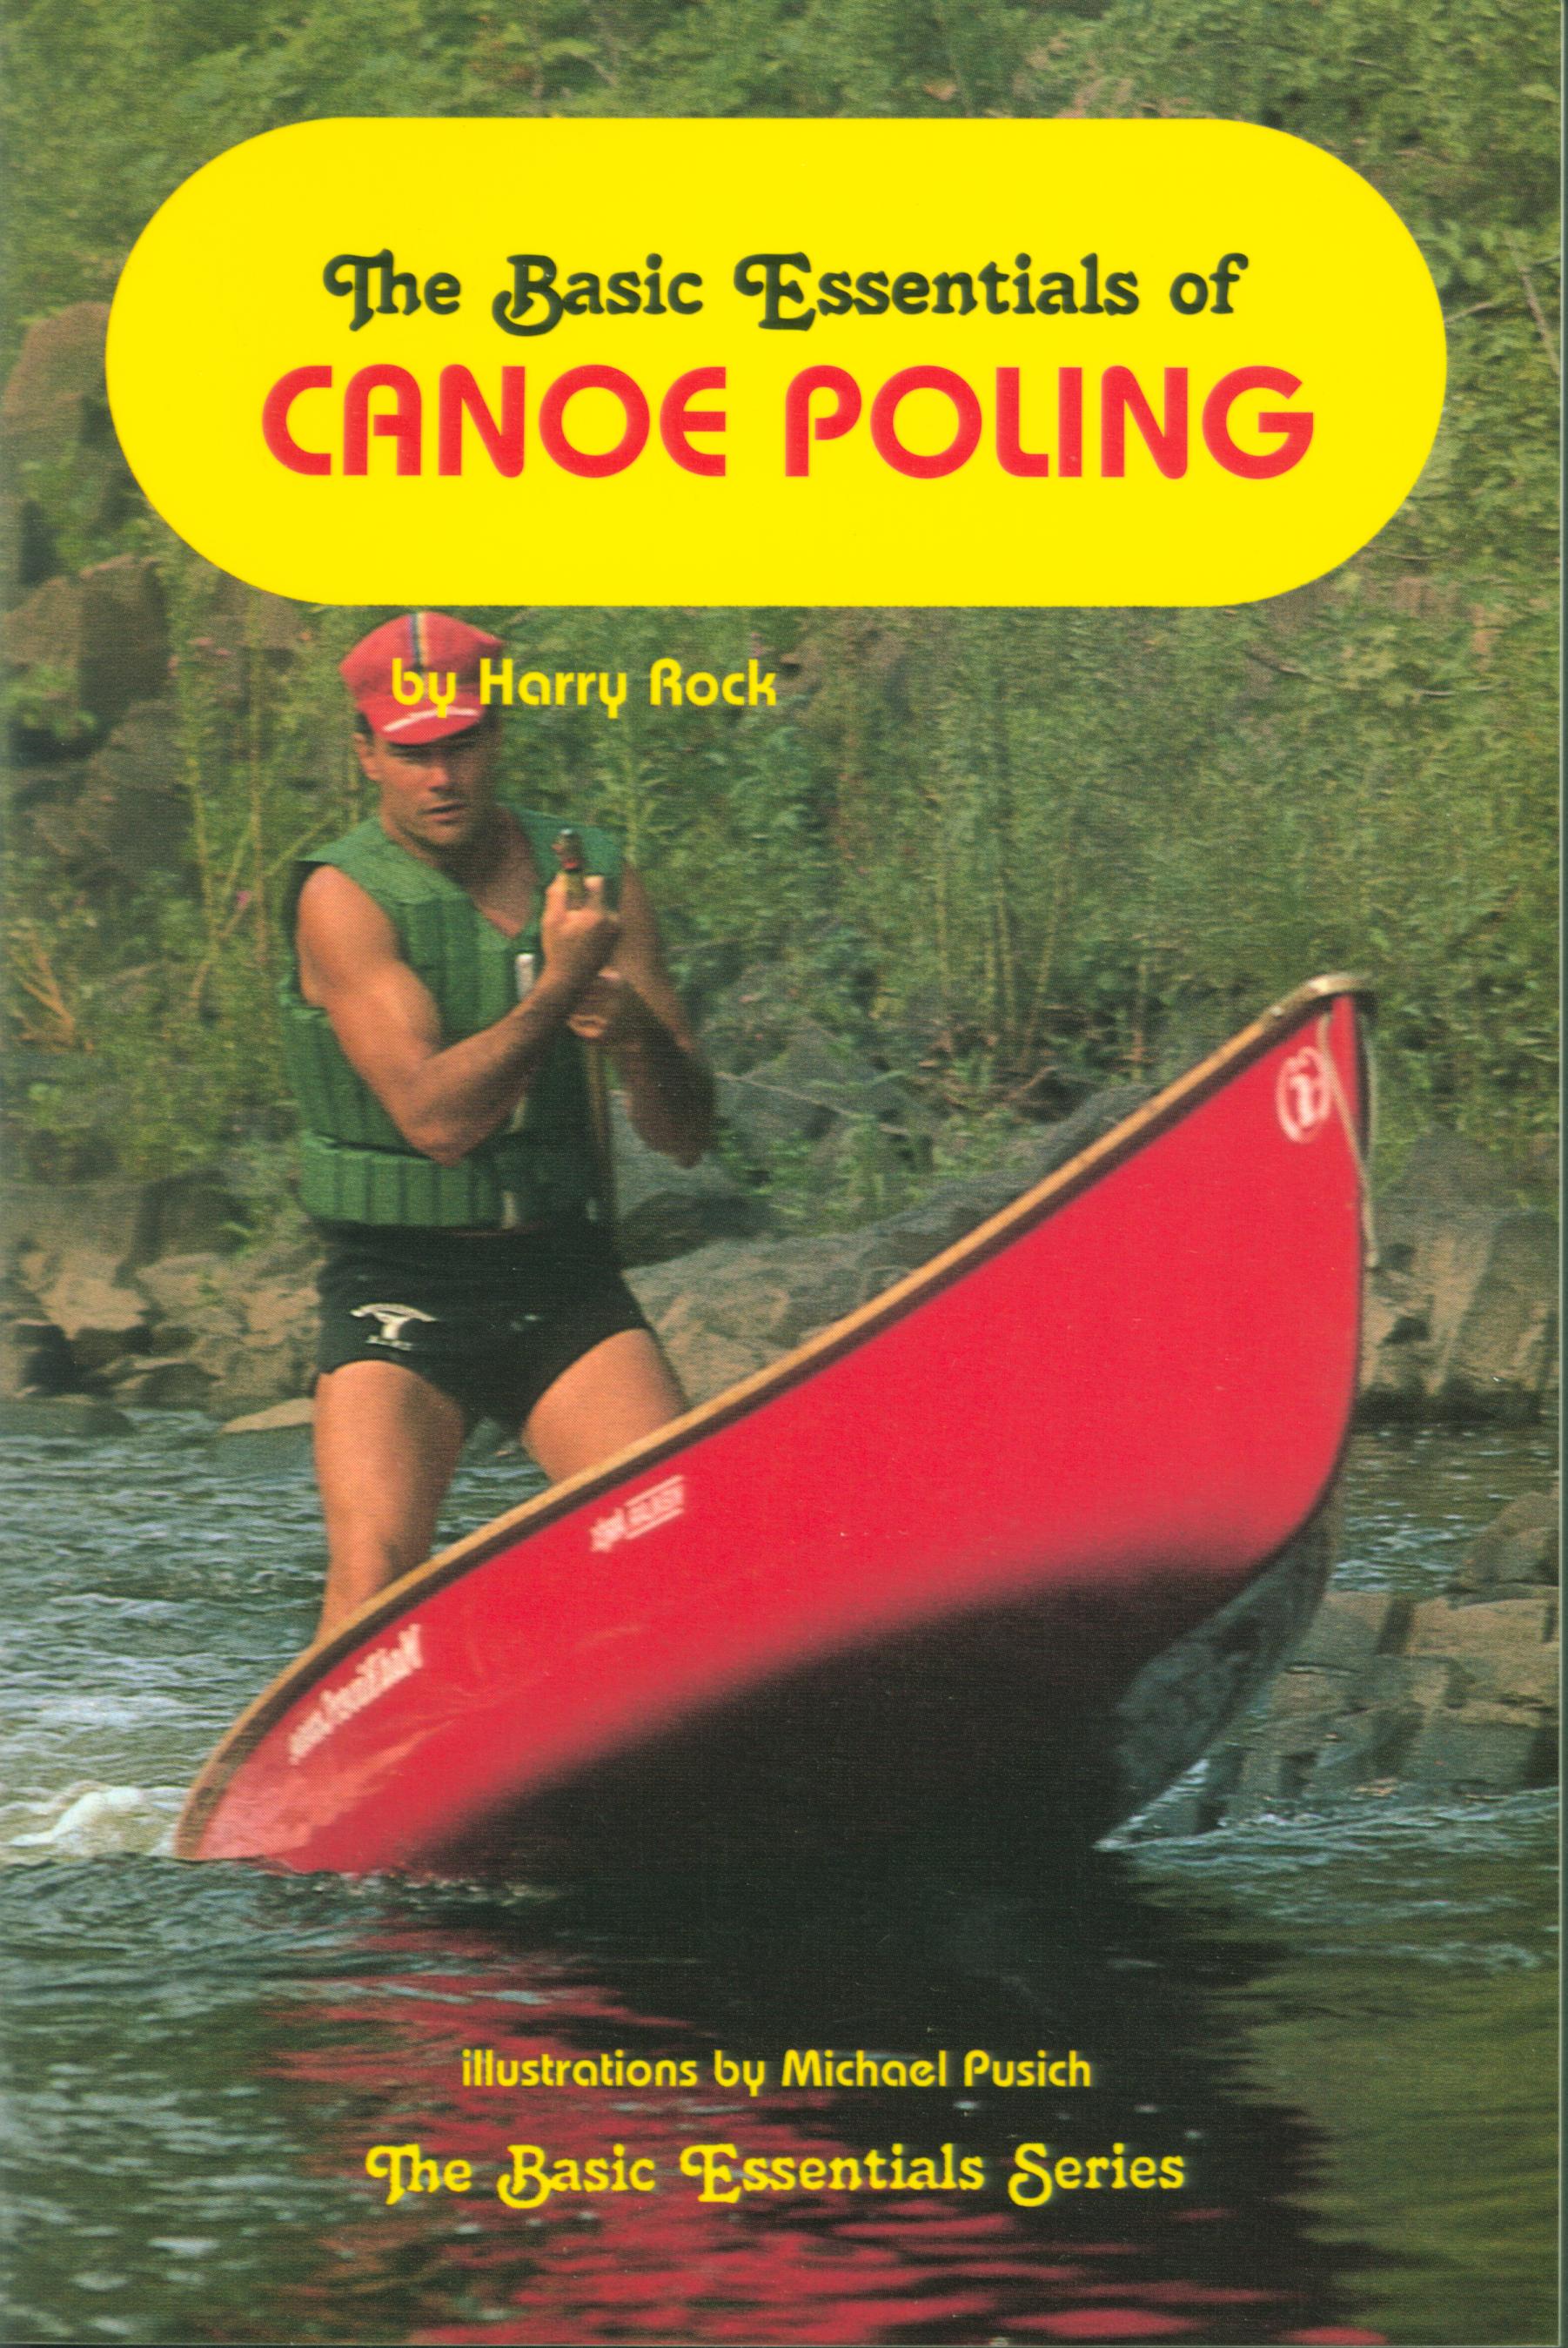 THE BASIC ESSENTIALS OF CANOE POLING.